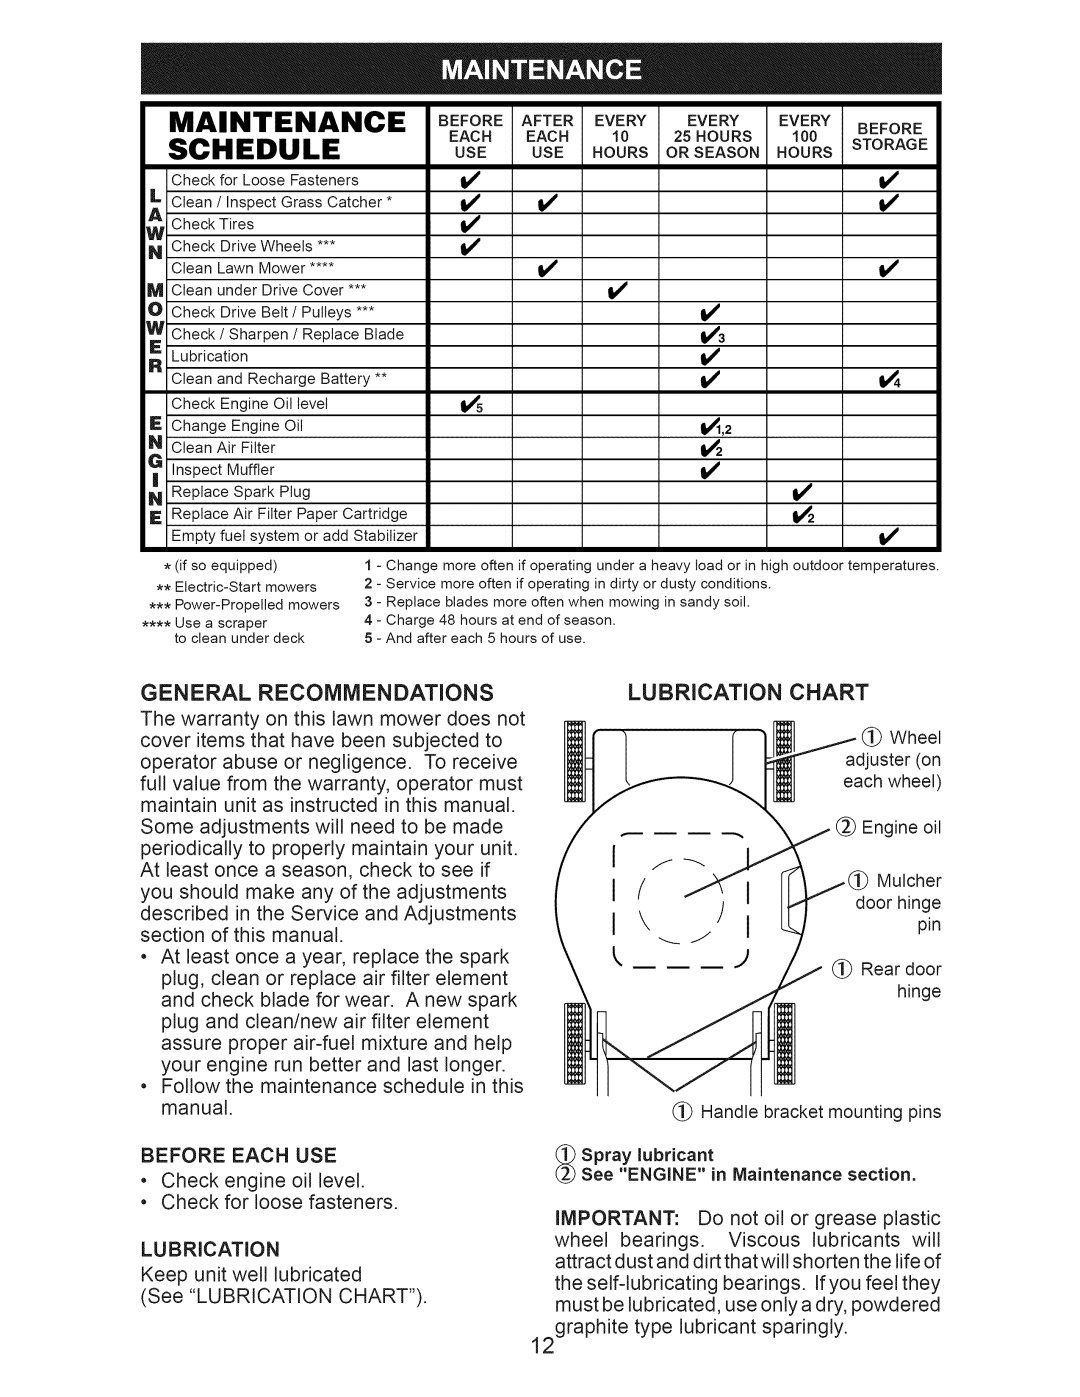 Craftsman 917.376400 owner manual Maintenance, Schedule, Use Hours 